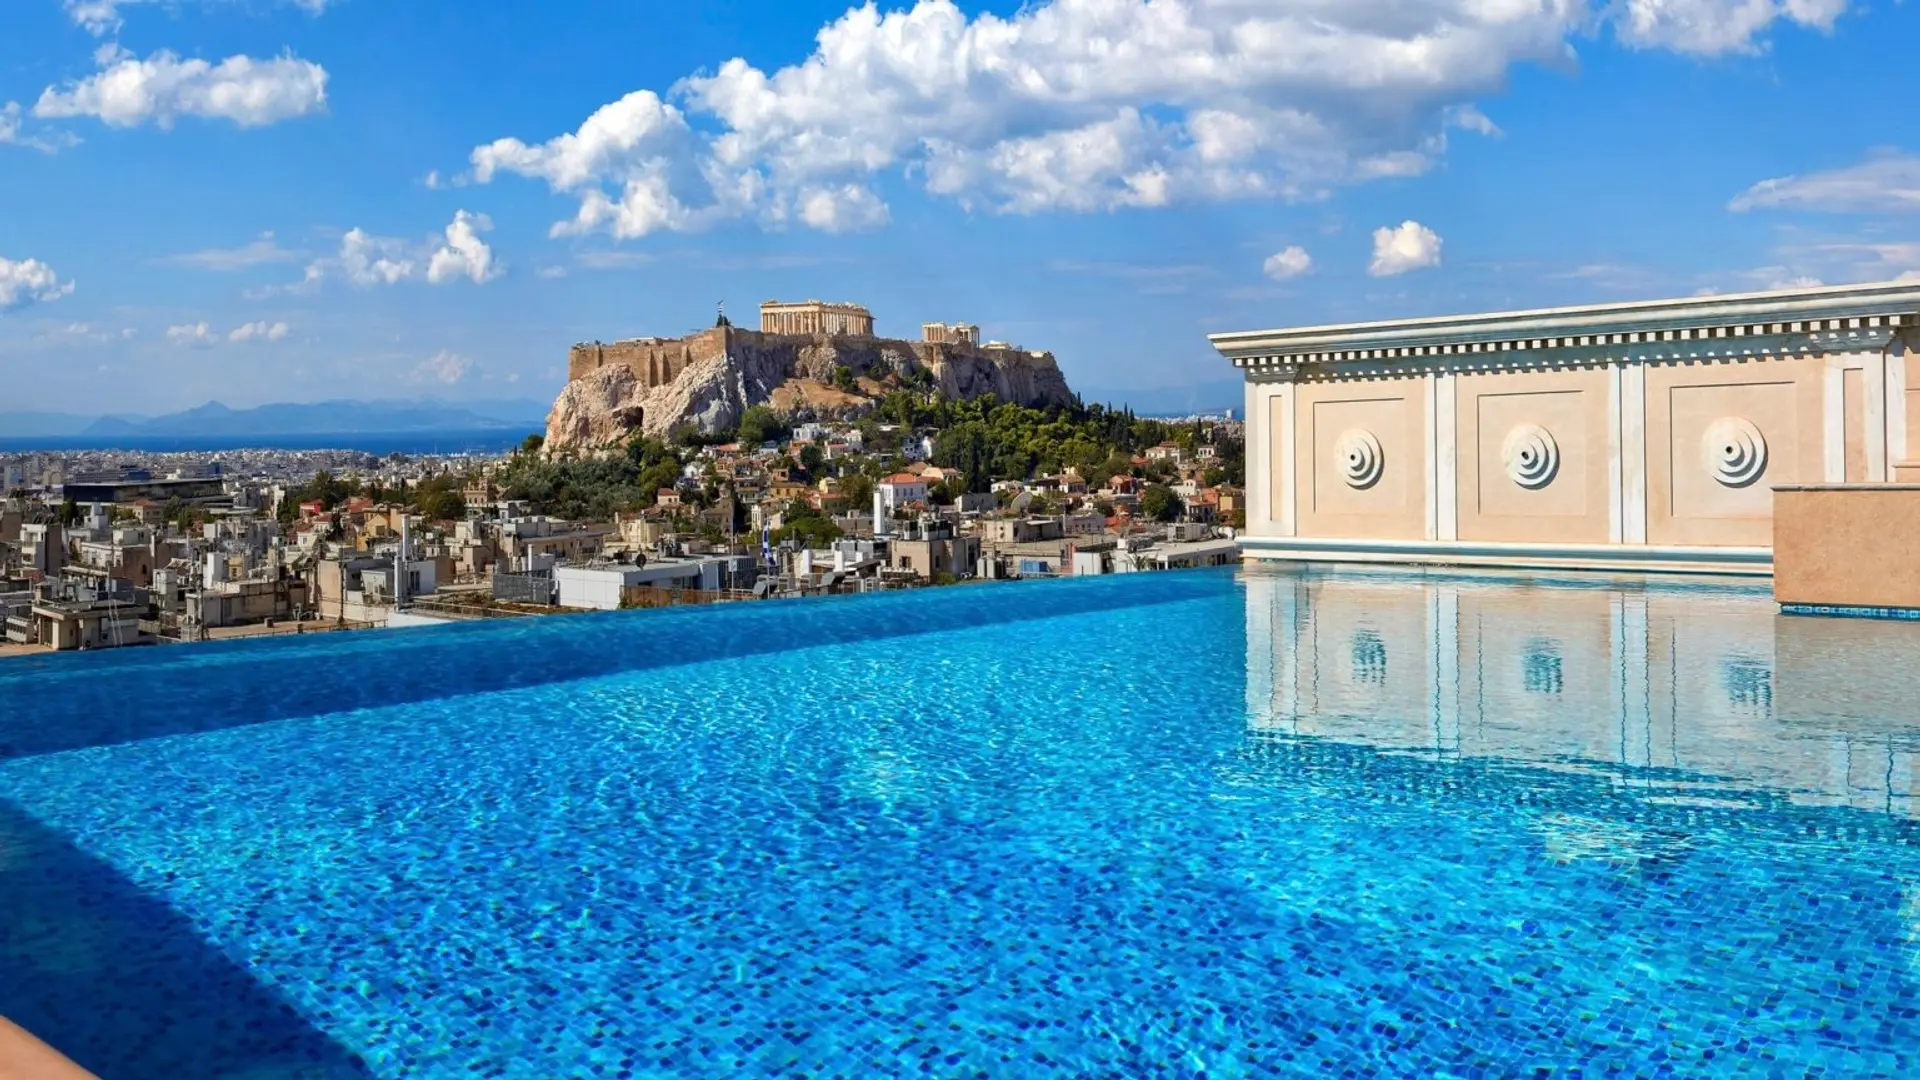 Infinity pool with clear blue water, and a insane view of nature, the city of Athens and a ancient building on top of mountain.